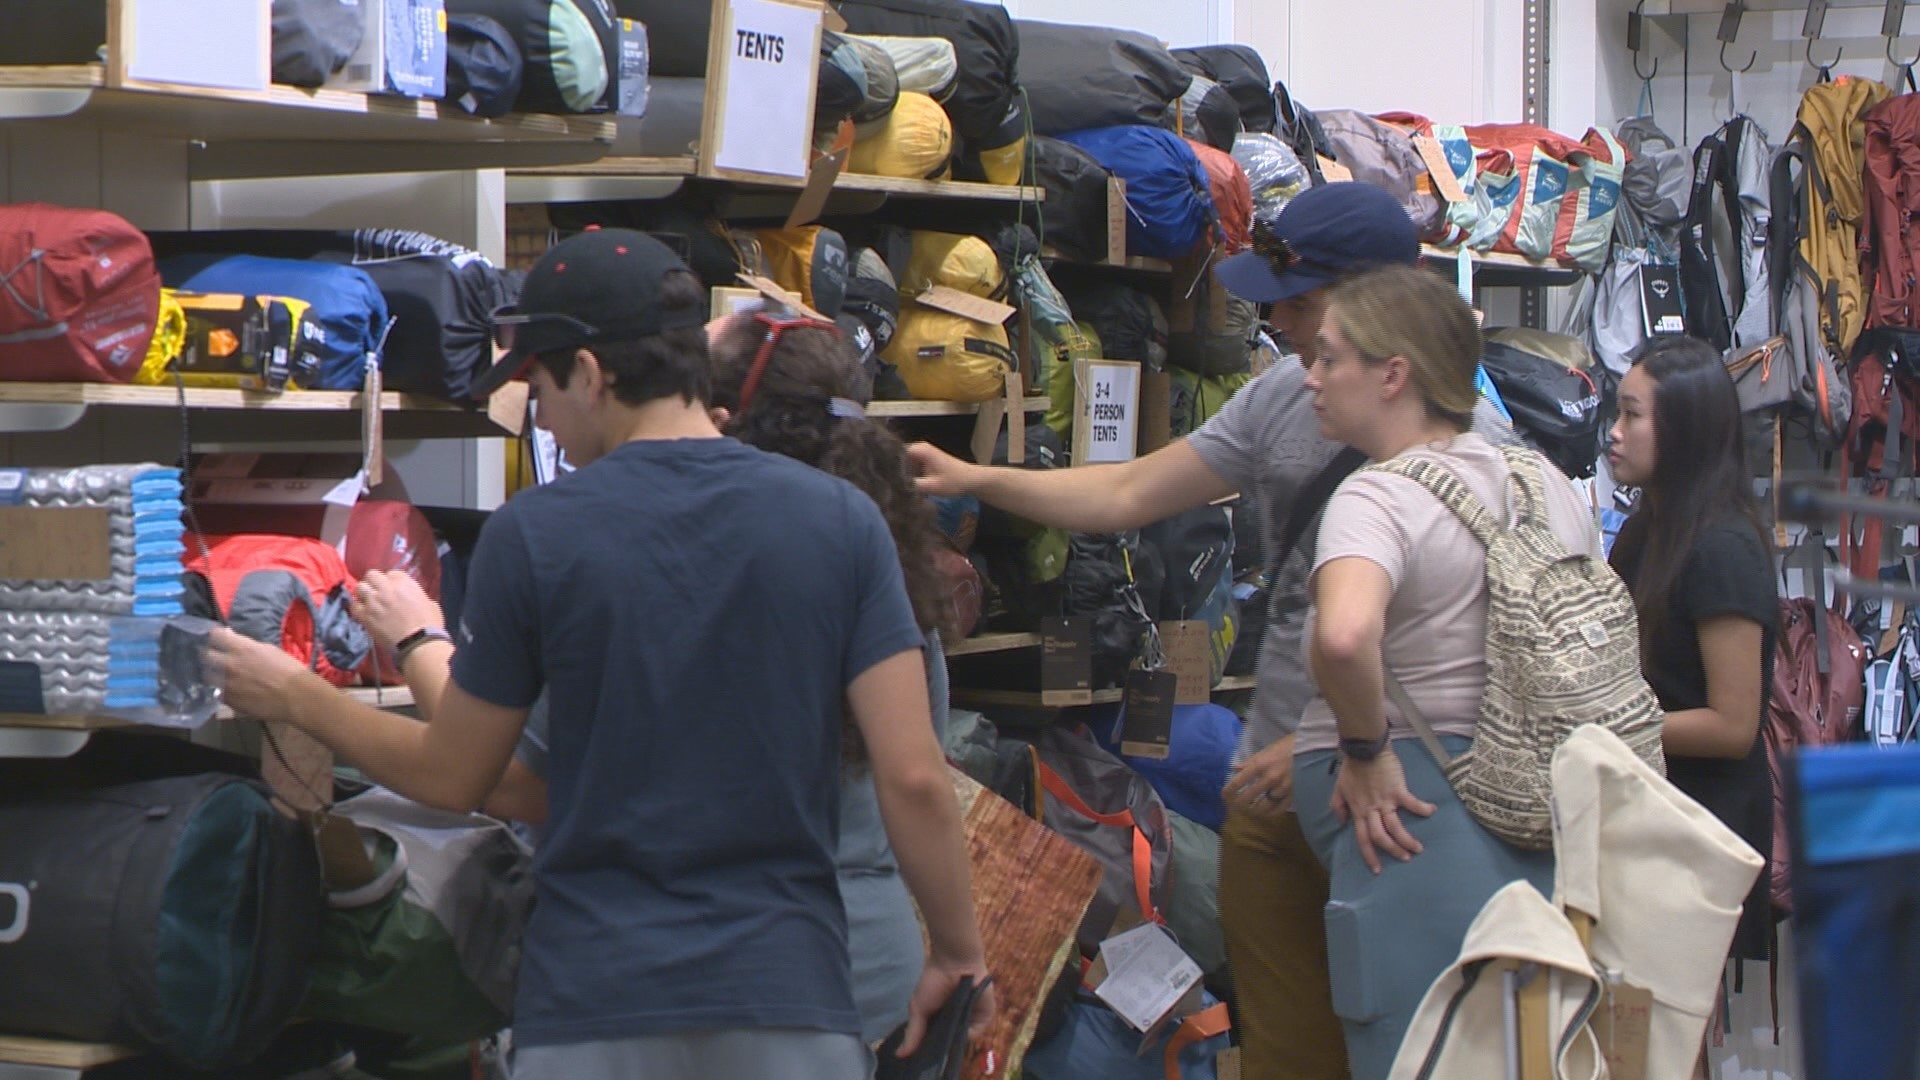 REI has held its garage sale program for decades. Now people can shop for preloved clothing, footwear and outdoor items at the new used gear store in Clackamas.